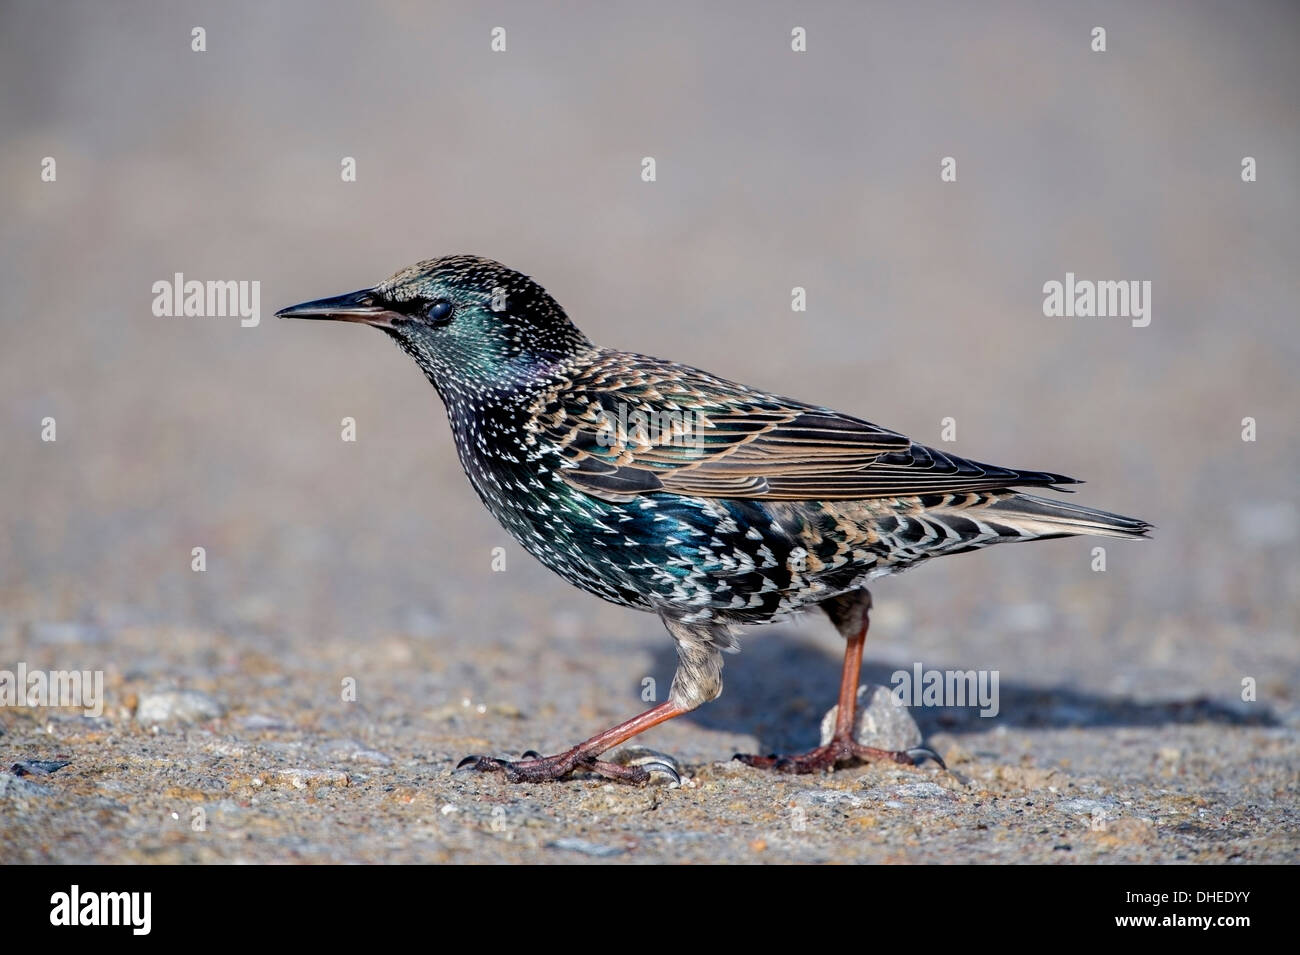 Starling (Sturnidae) just after landing at Lands End complex, Bob Sharples/Alamy Stock Photo